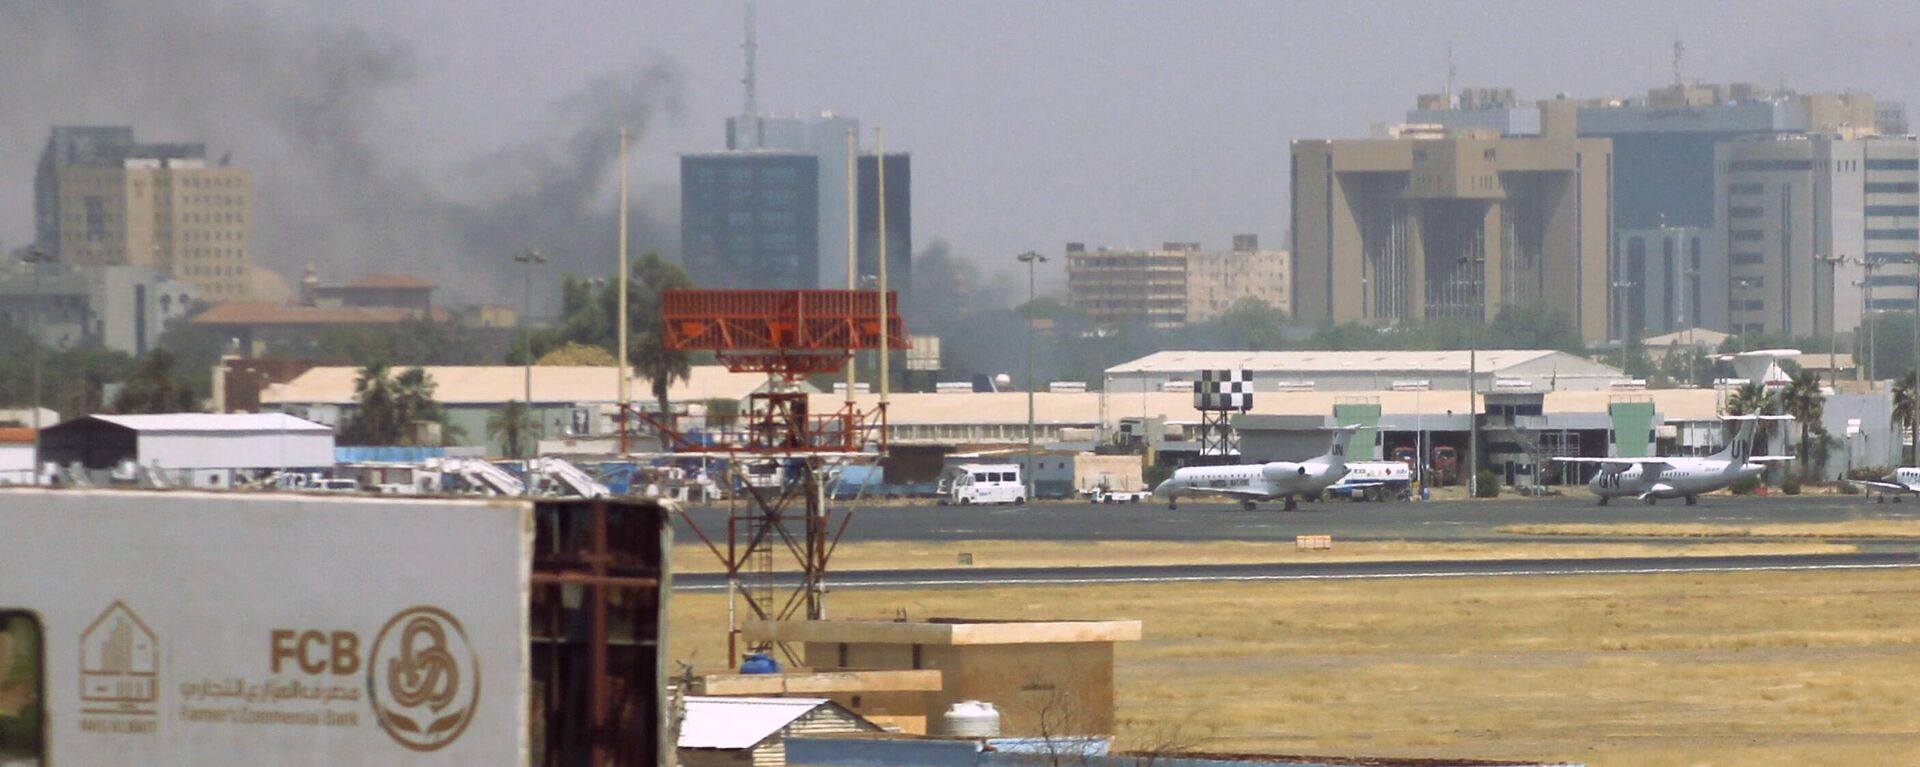 Military vehicles can be seen as smoke billows above buildings in the vicinity of the Khartoum airport on April 15, 2023, amid clashes in the city. - Sputnik Africa, 1920, 23.04.2023